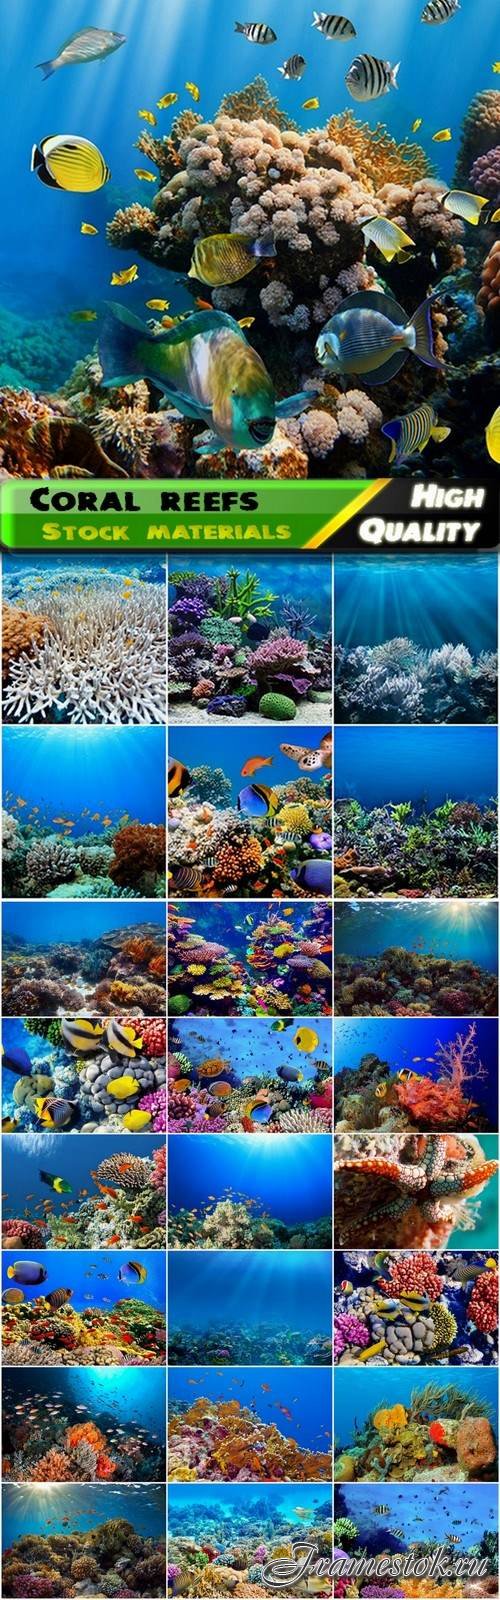 Underwater coral reefs and polyps with fish - 25 HQ Jpg